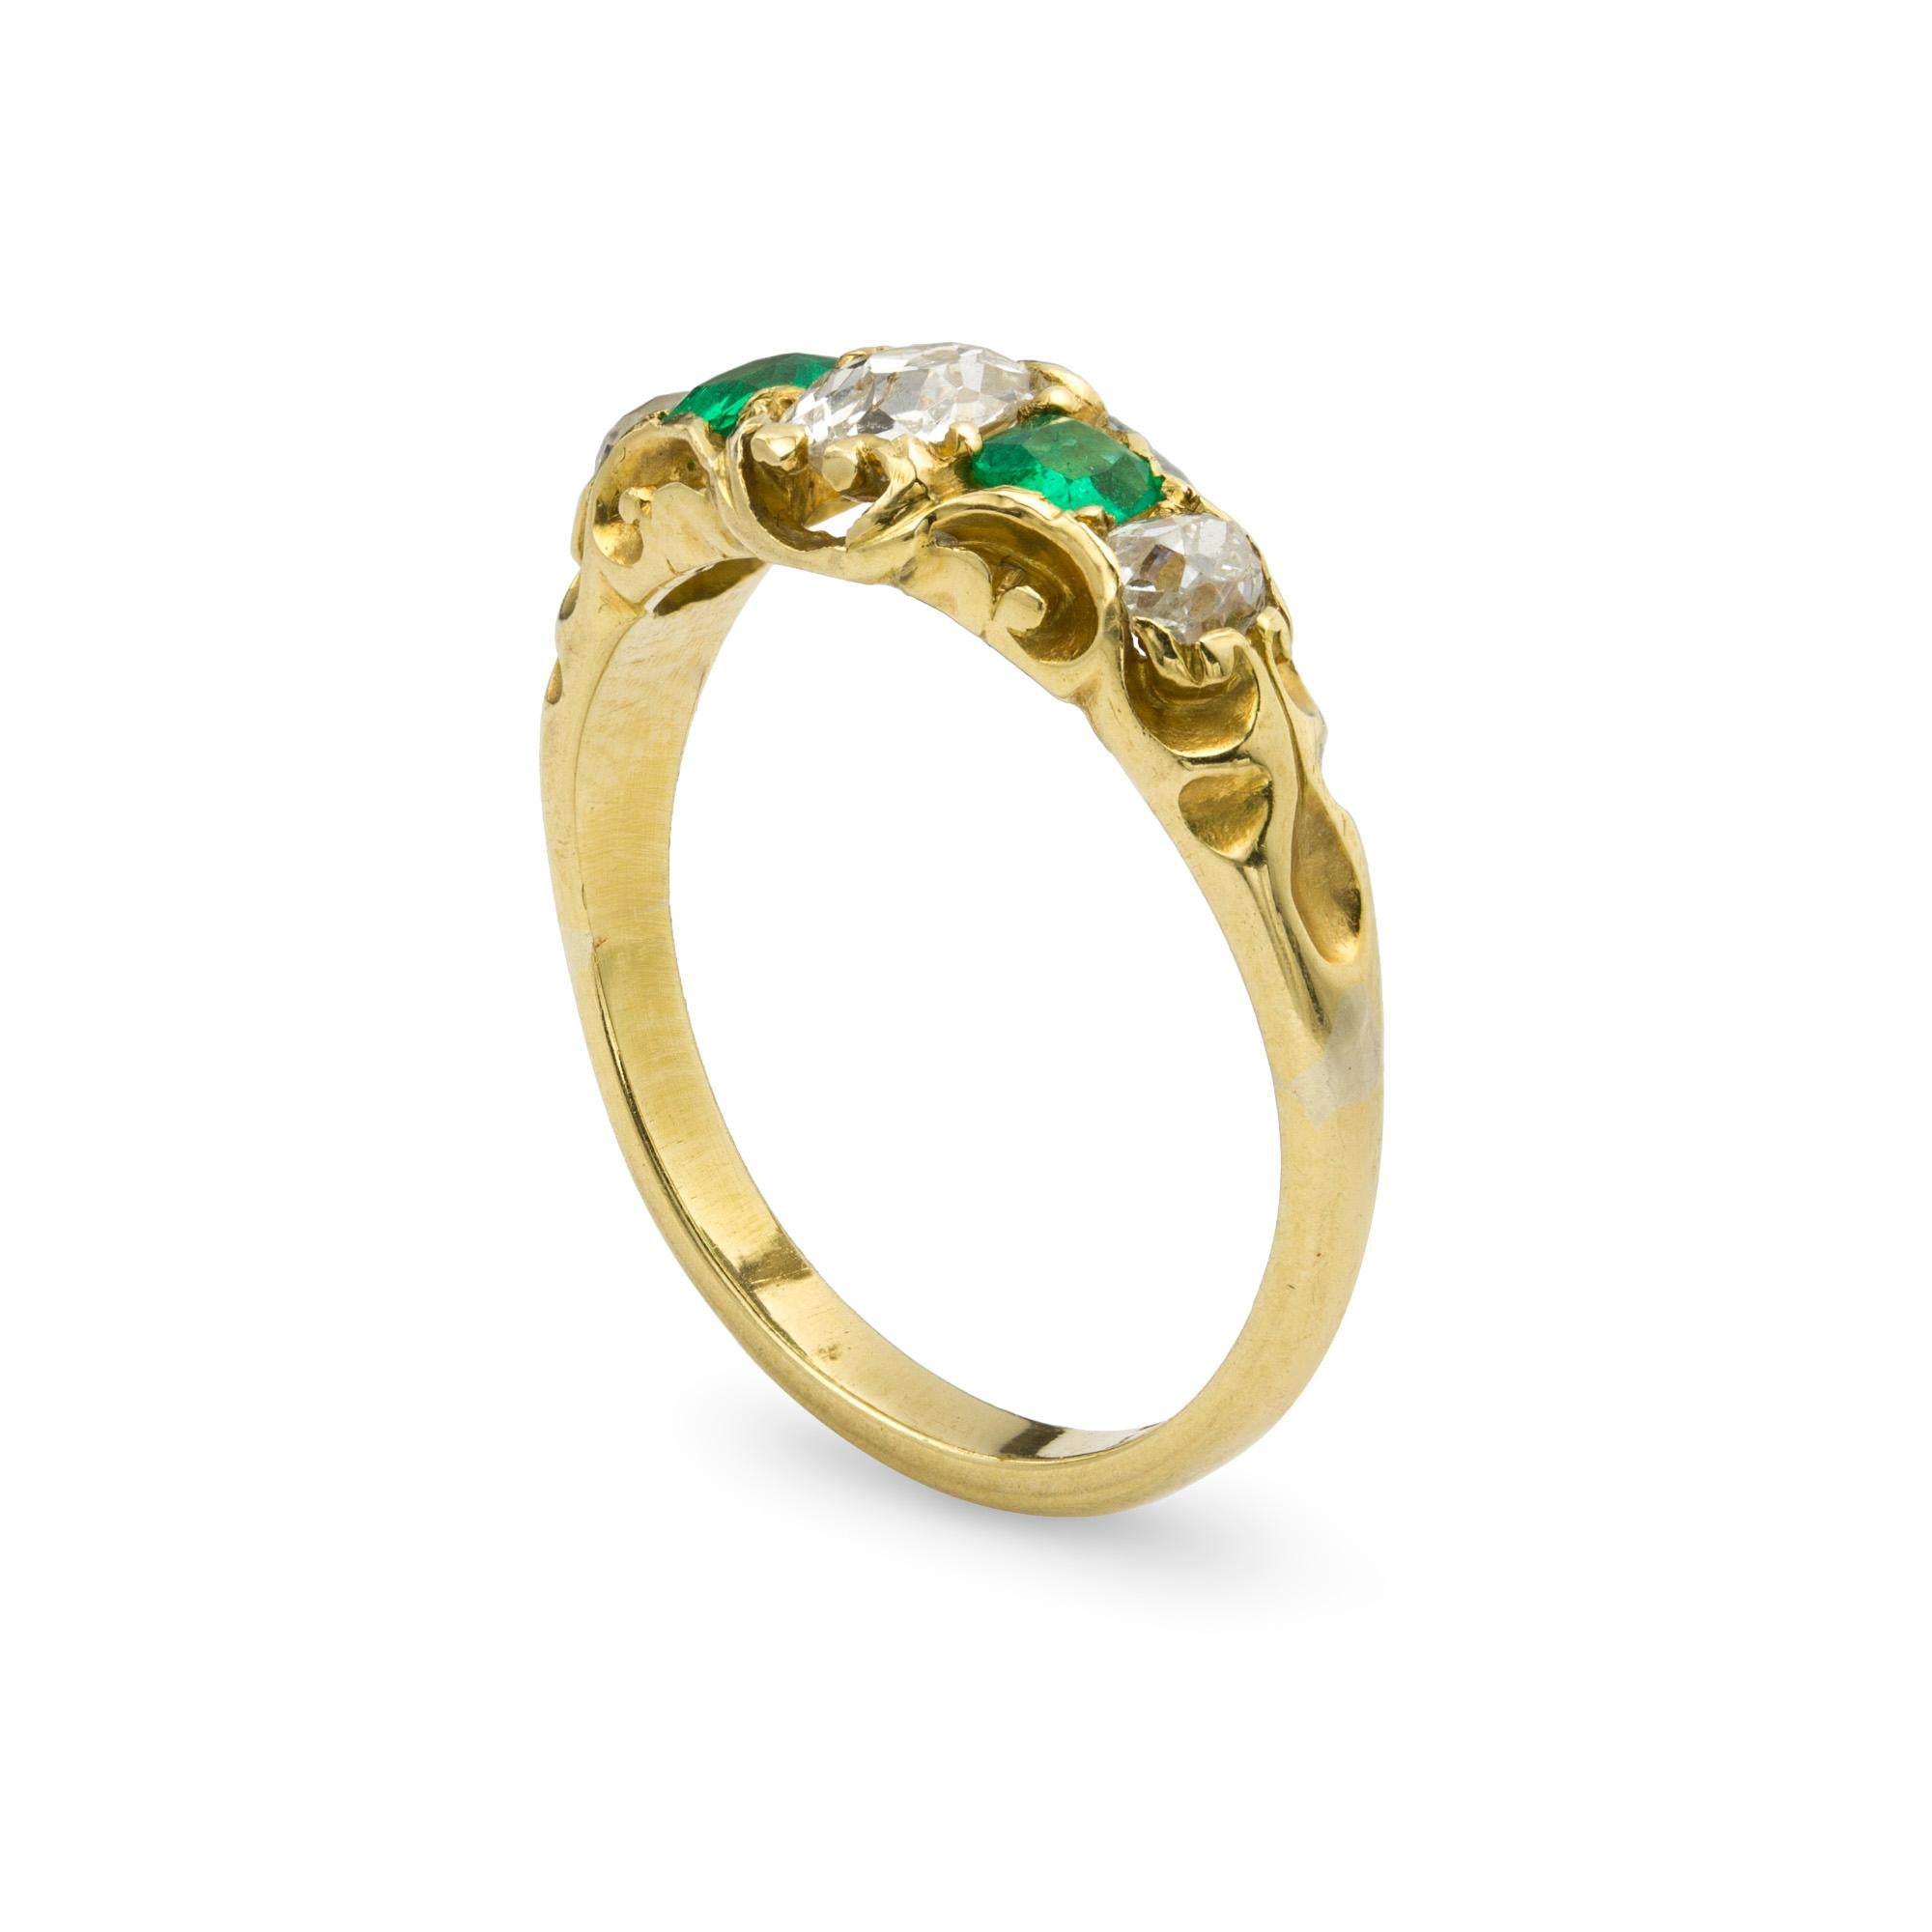 A Victorian emerald and diamond five stone gold ring, the ring set with three old-cut diamonds weighing approximately a total of 0.65 carats, and two cushion-cut emeralds weighing approximately a total of 0.25carats, all set in 18ct yellow gold